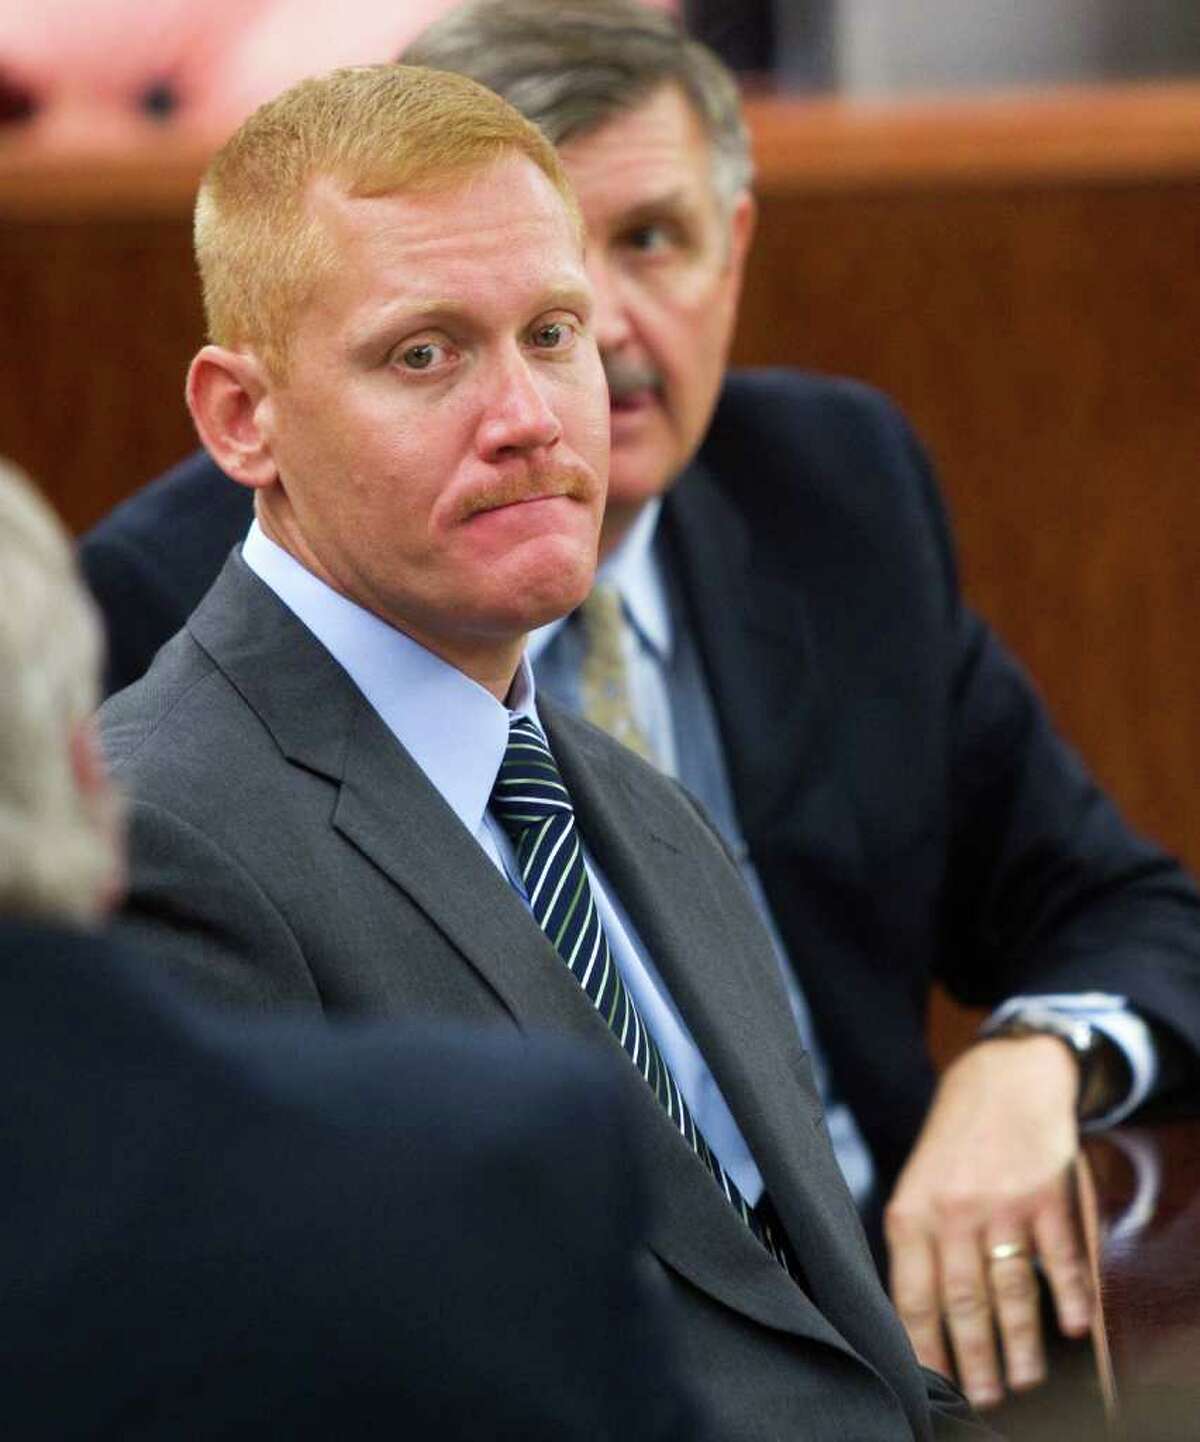 Bellaire Police Sgt. Jeff Cotton sits in the 232nd District Court before opening arguments in his trial Wednesday, May 5, 2010, in Houston. Cotton, 40, is on trial for aggravated assault by a public servant for a shooting incident, where he stands accused for shooting Robert Tolan in his parents' driveway. ( Brett Coomer / Houston Chronicle )